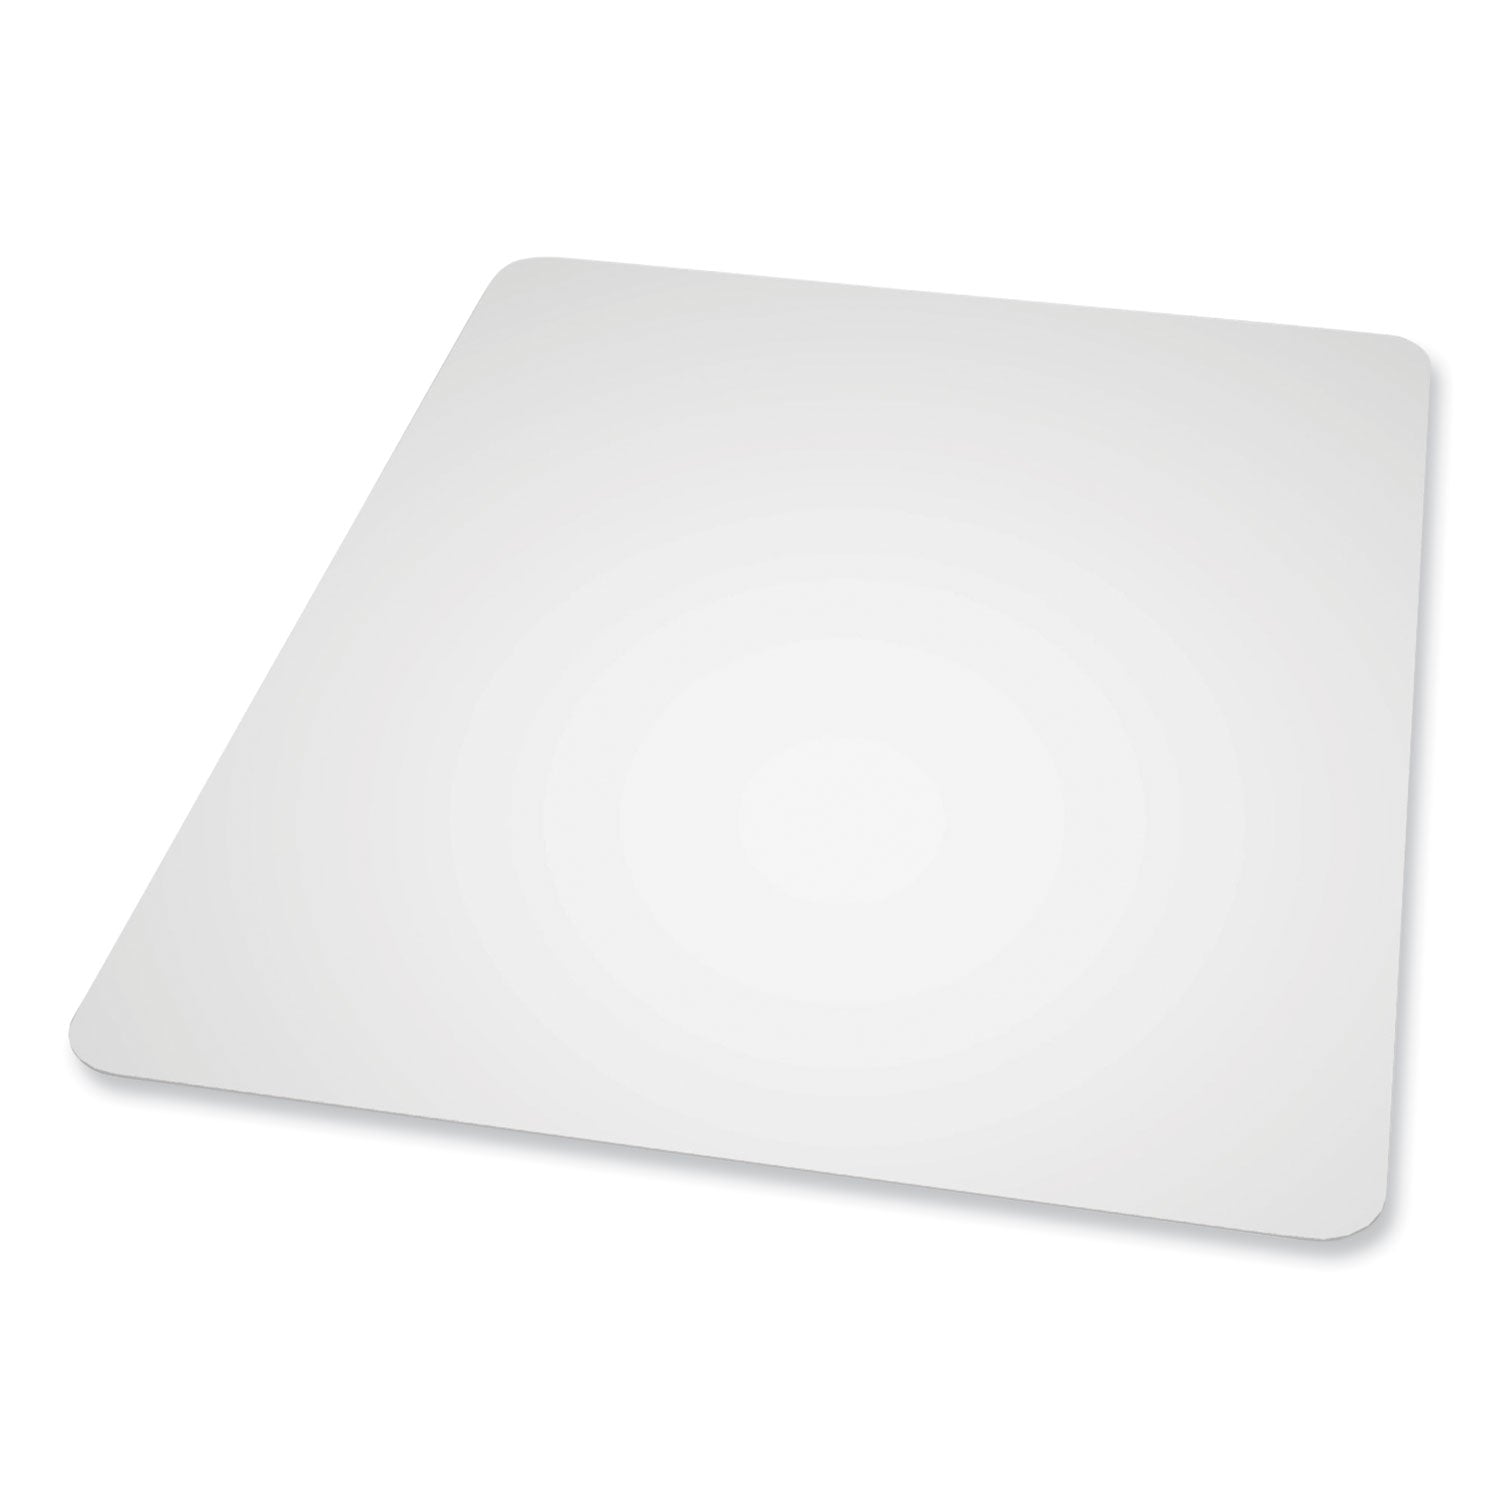 everlife-chair-mat-for-hard-floors-heavy-use-rectangular-36-x-48-clear-ships-in-4-6-business-days_esr132031 - 1